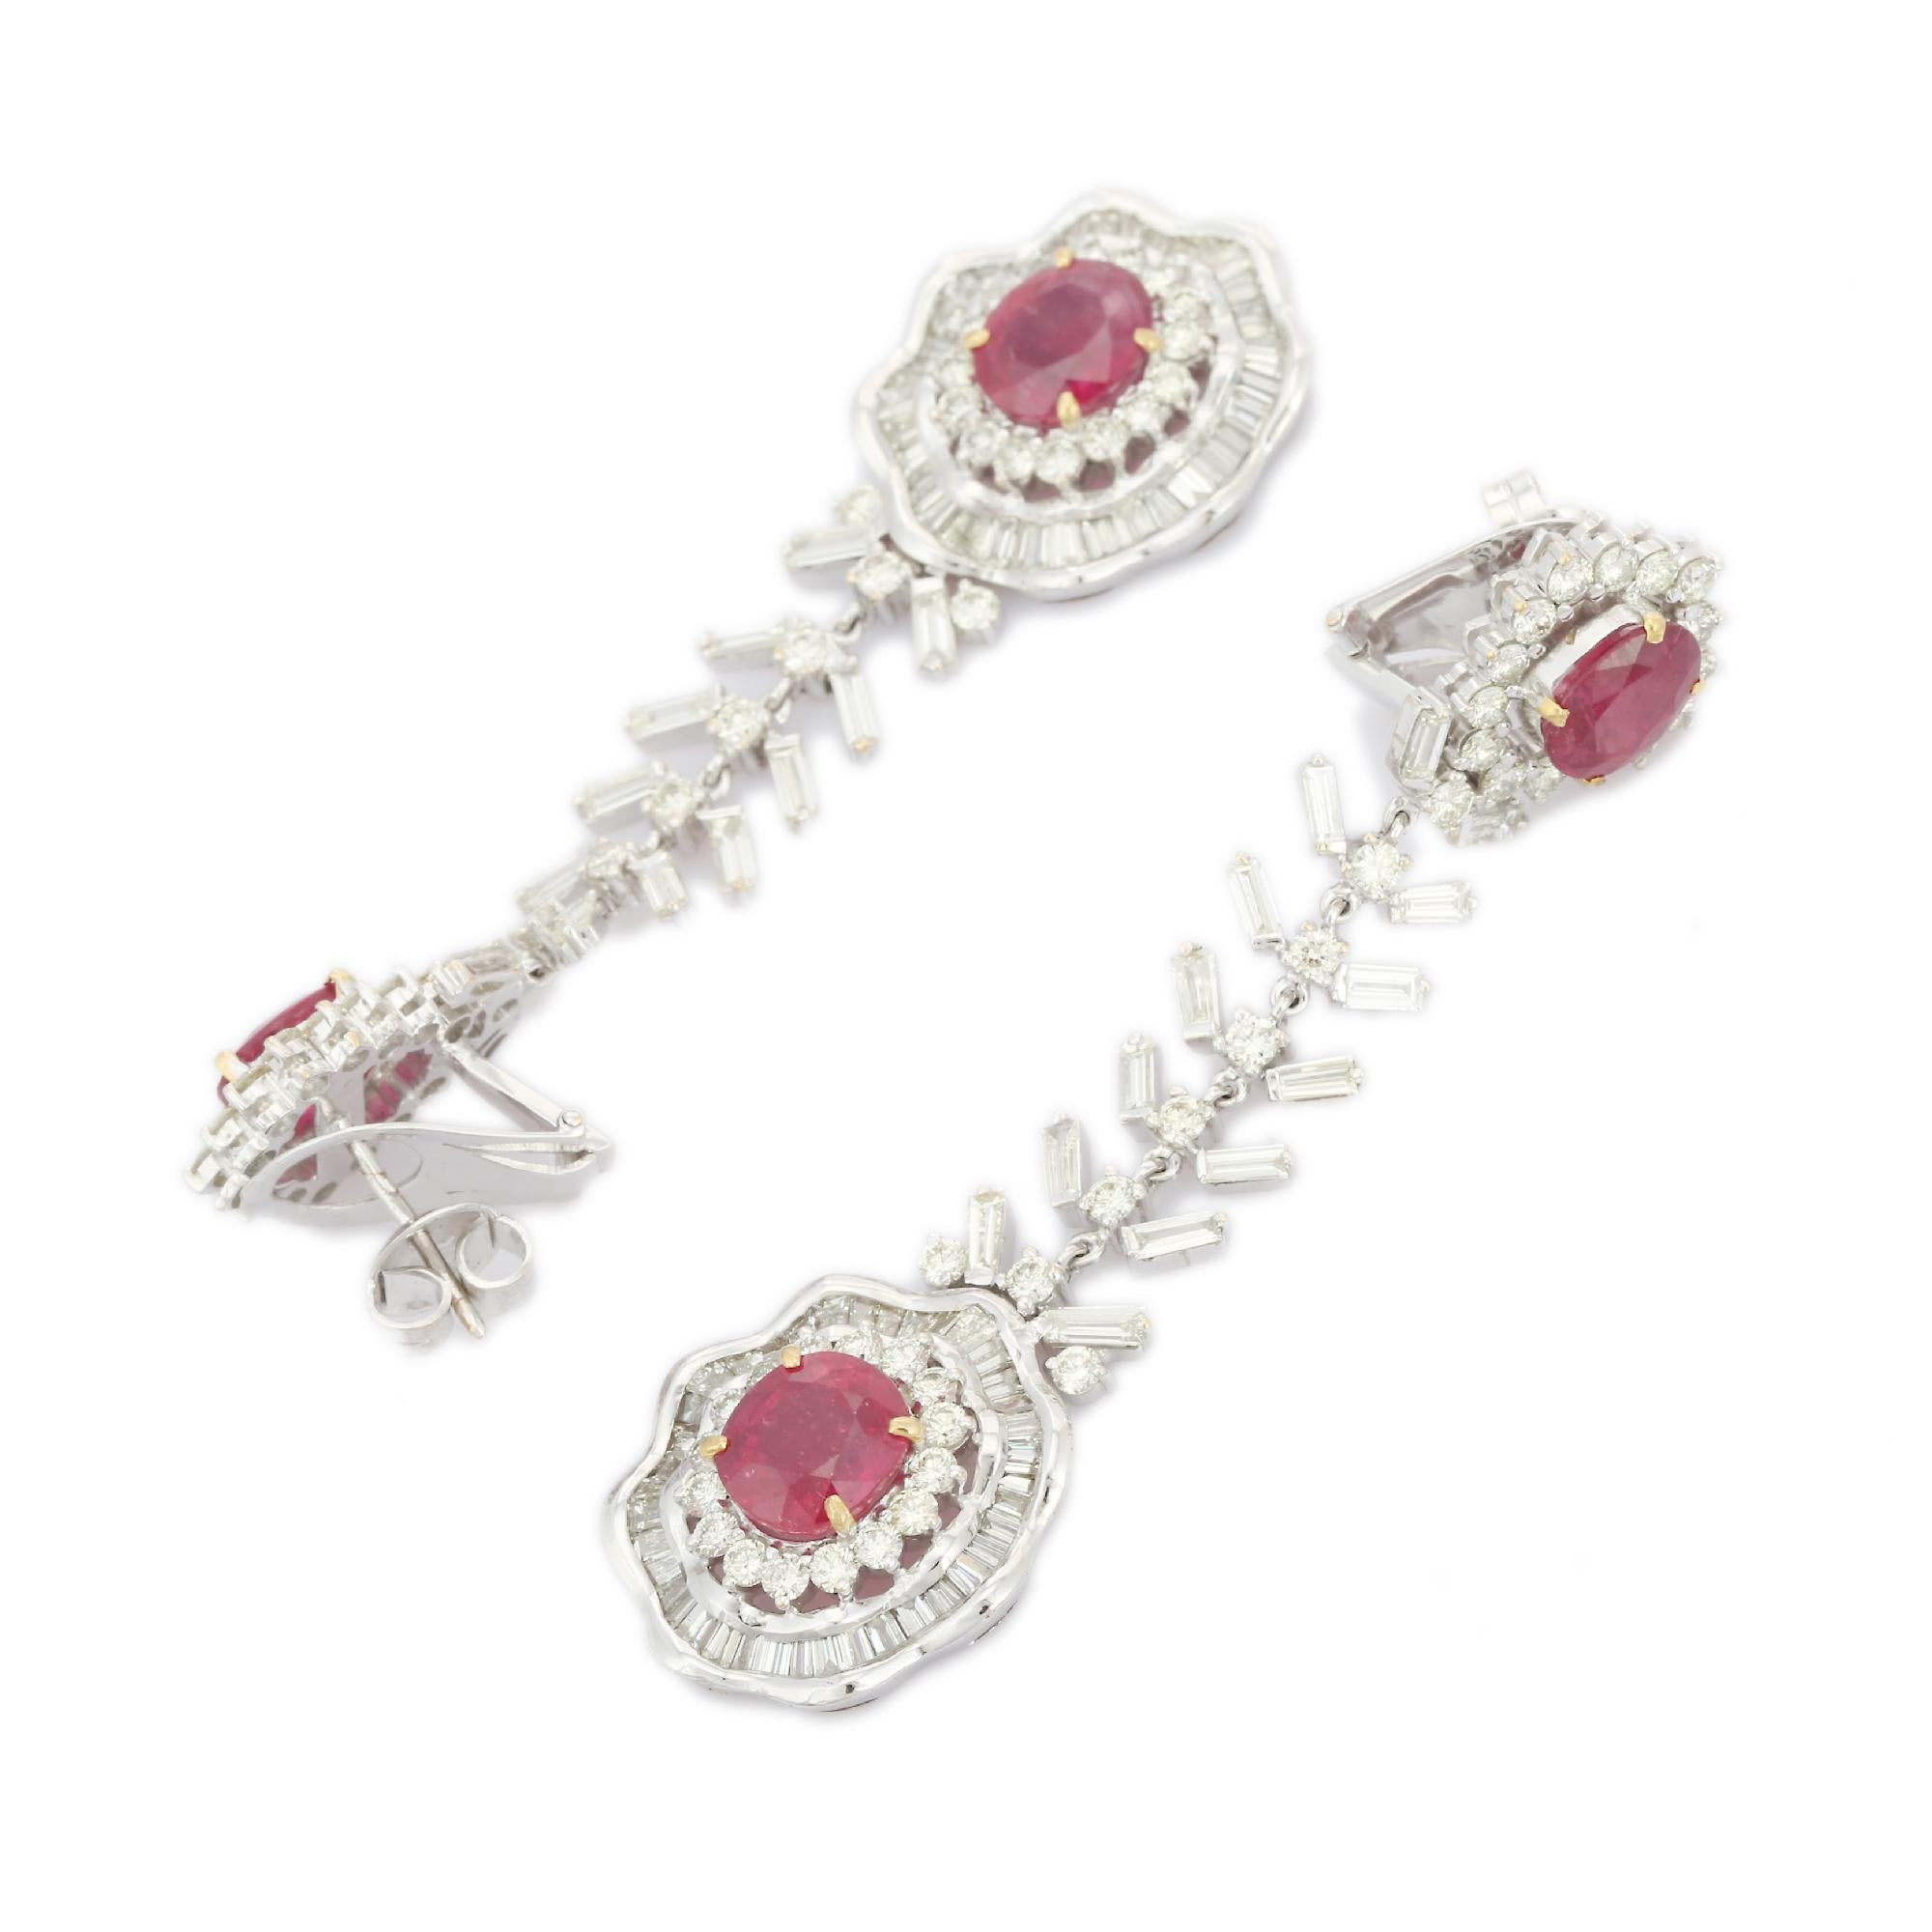 Floral Diamond Ruby Dangle Drop Earrings in 18K Gold to make a statement with your look. You shall need statement dangle earrings to make a statement with your look. These earrings create a sparkling, luxurious look featuring oval cut rubies.
Ruby